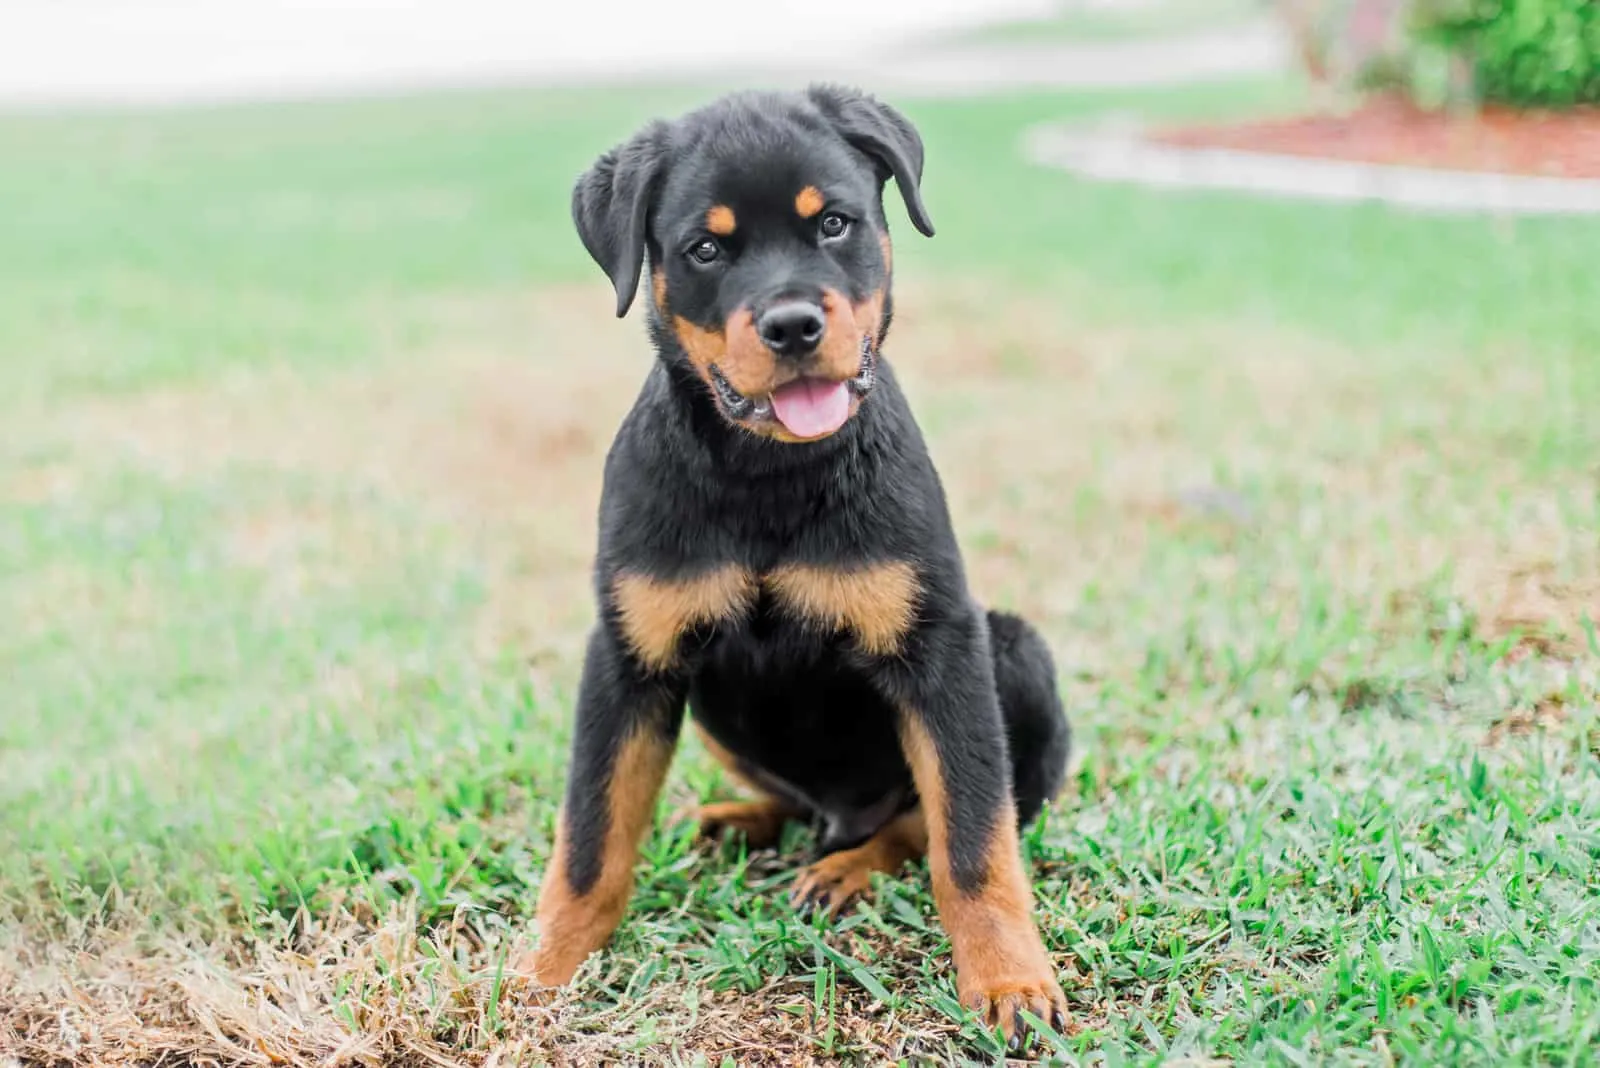 A Rottweiler puppy is sitting on the grass